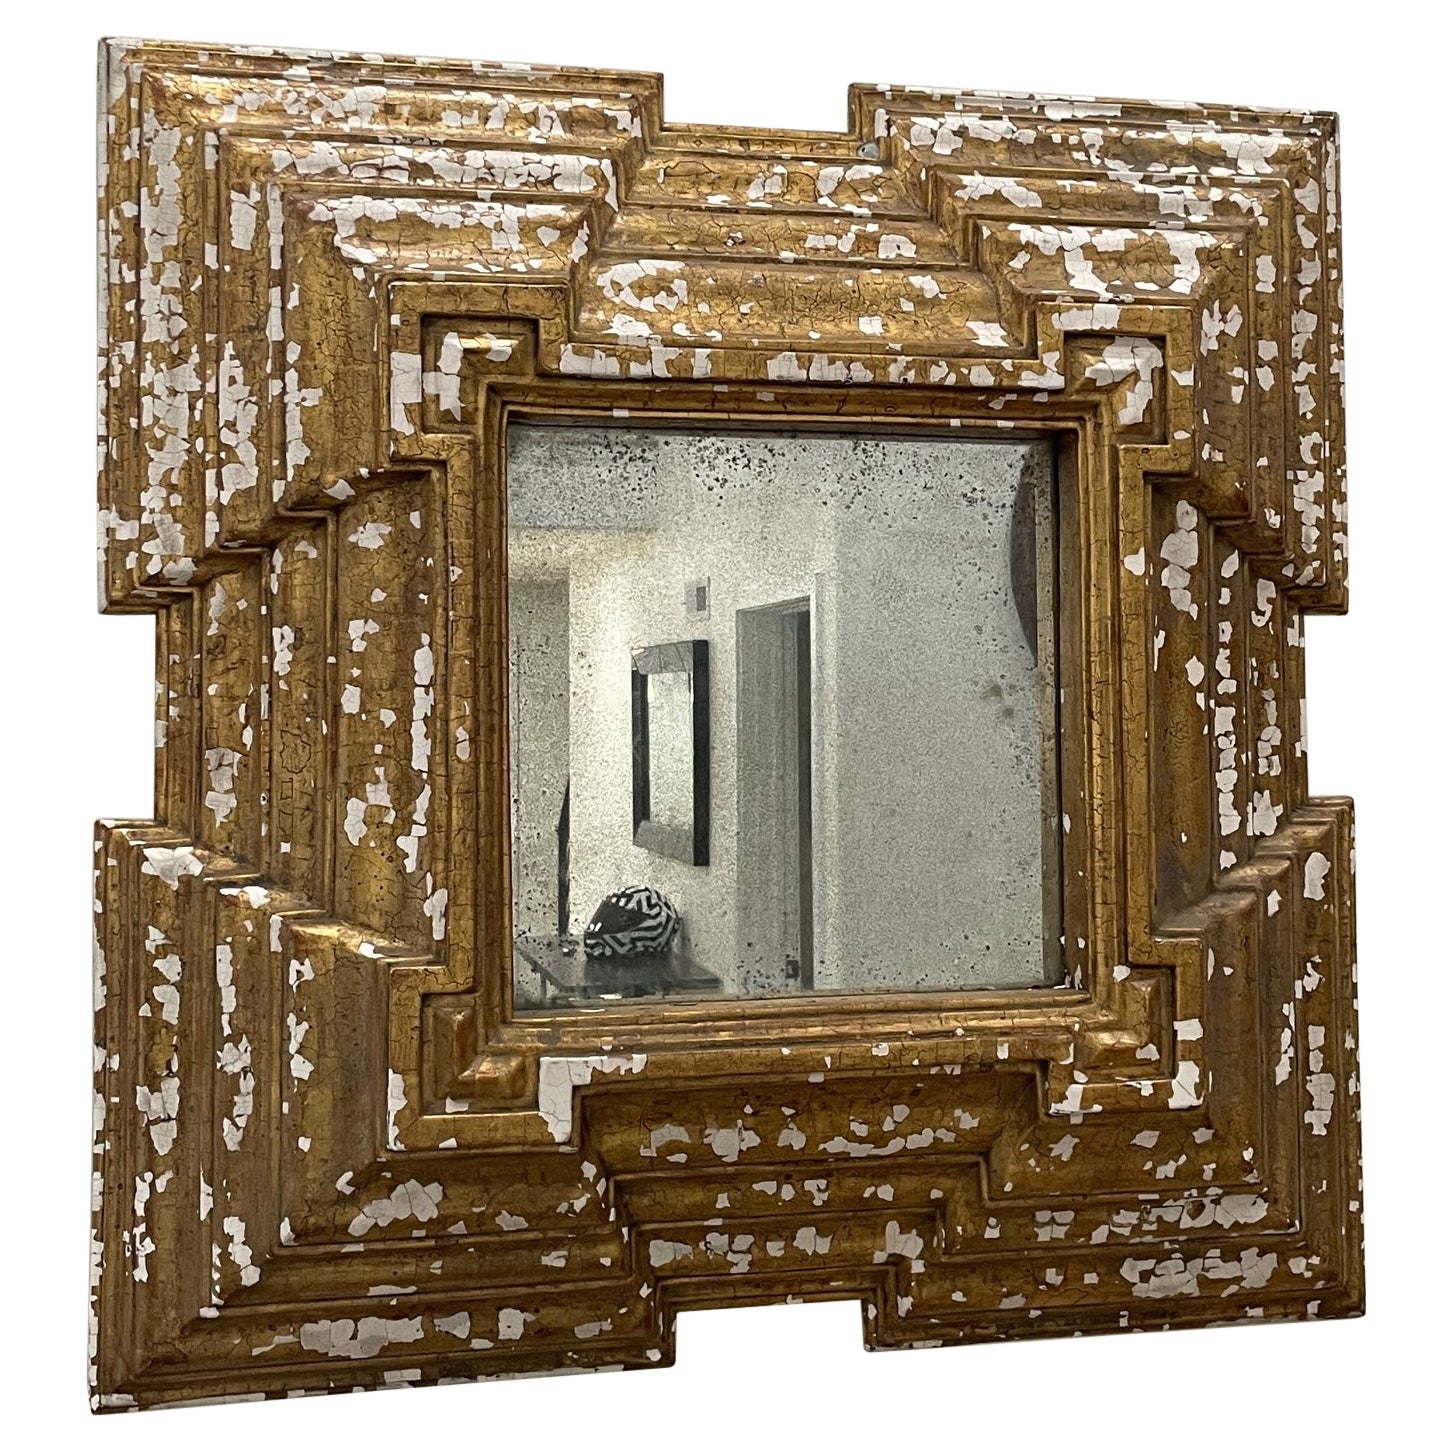 Jean de Merry custom mercury aged mirror with incredible natural craquelure For Sale